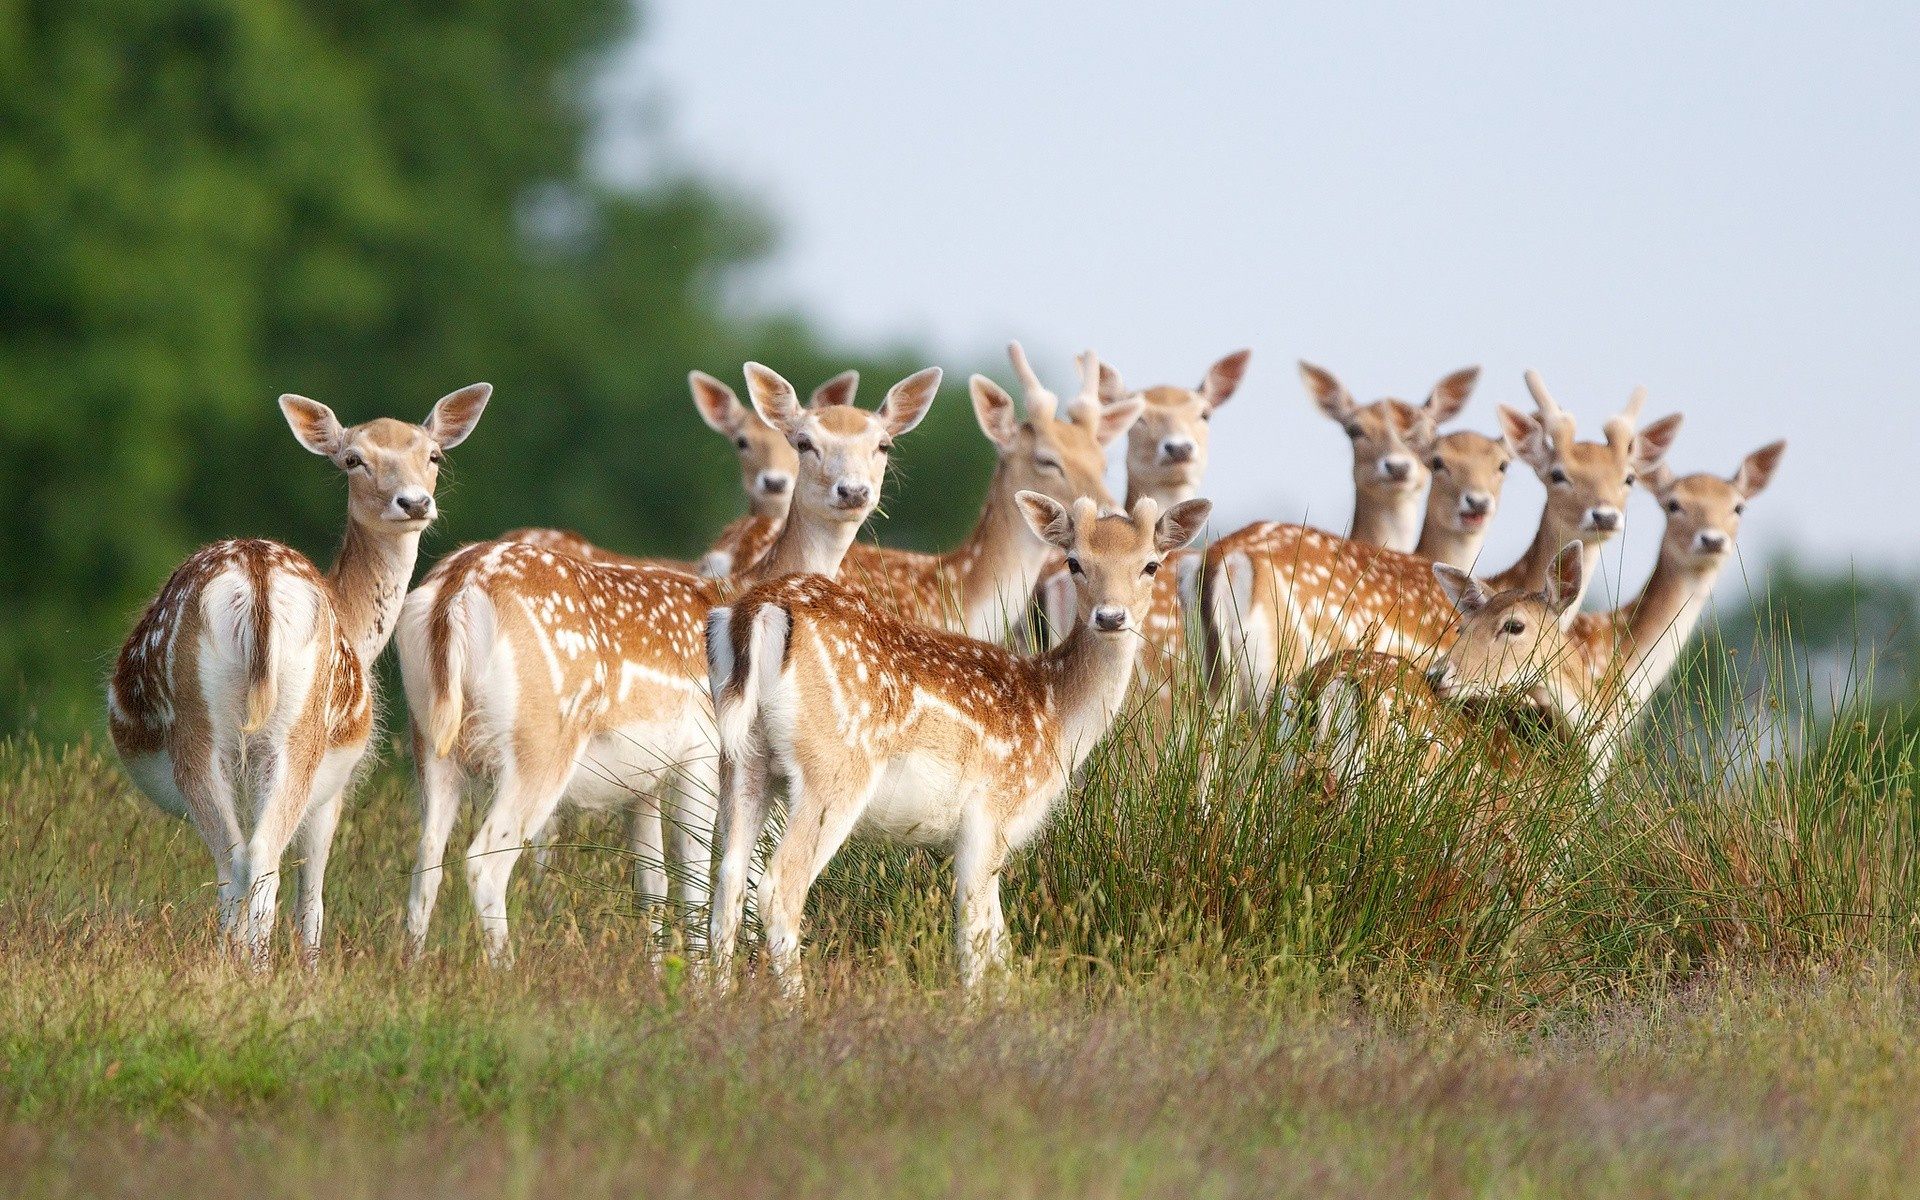 What is a flock of deer called?